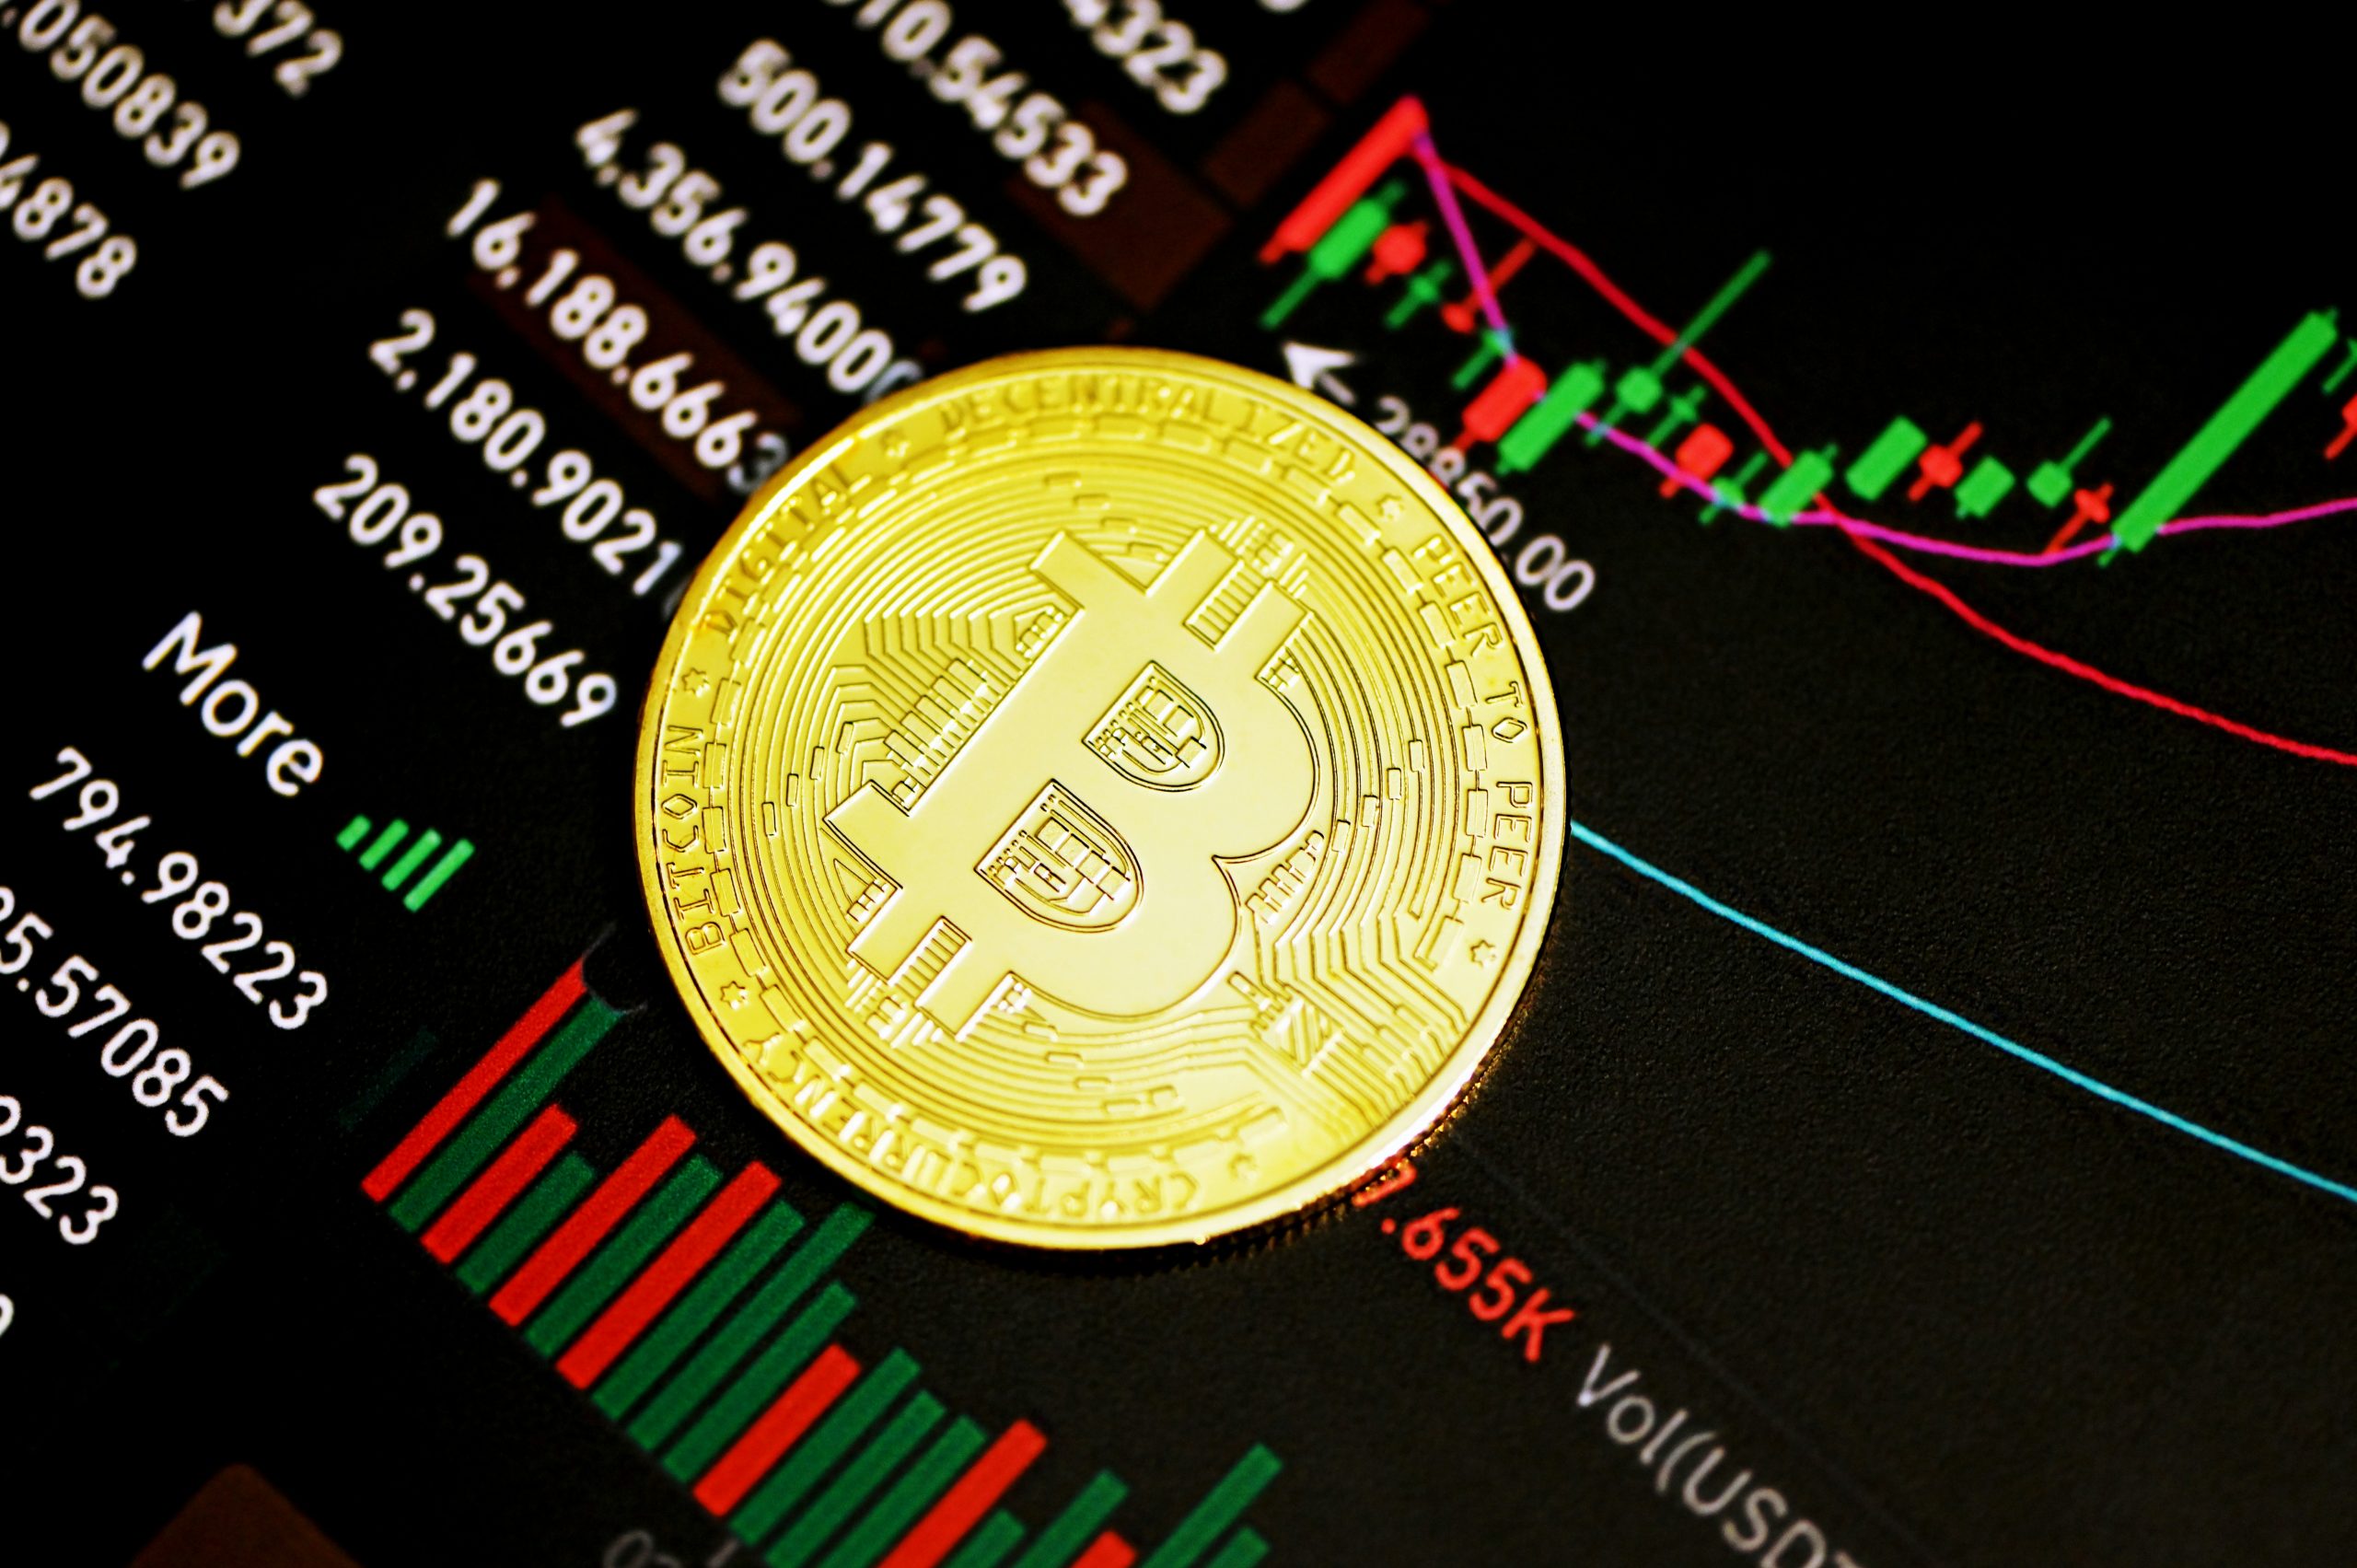 Bitcoin Price Prediction: Analyst Says BTC Poised To Surge To $60K As Investors Rush To Buy This Bitcoin ETF Play For 20X Potential Before Time Runs Out